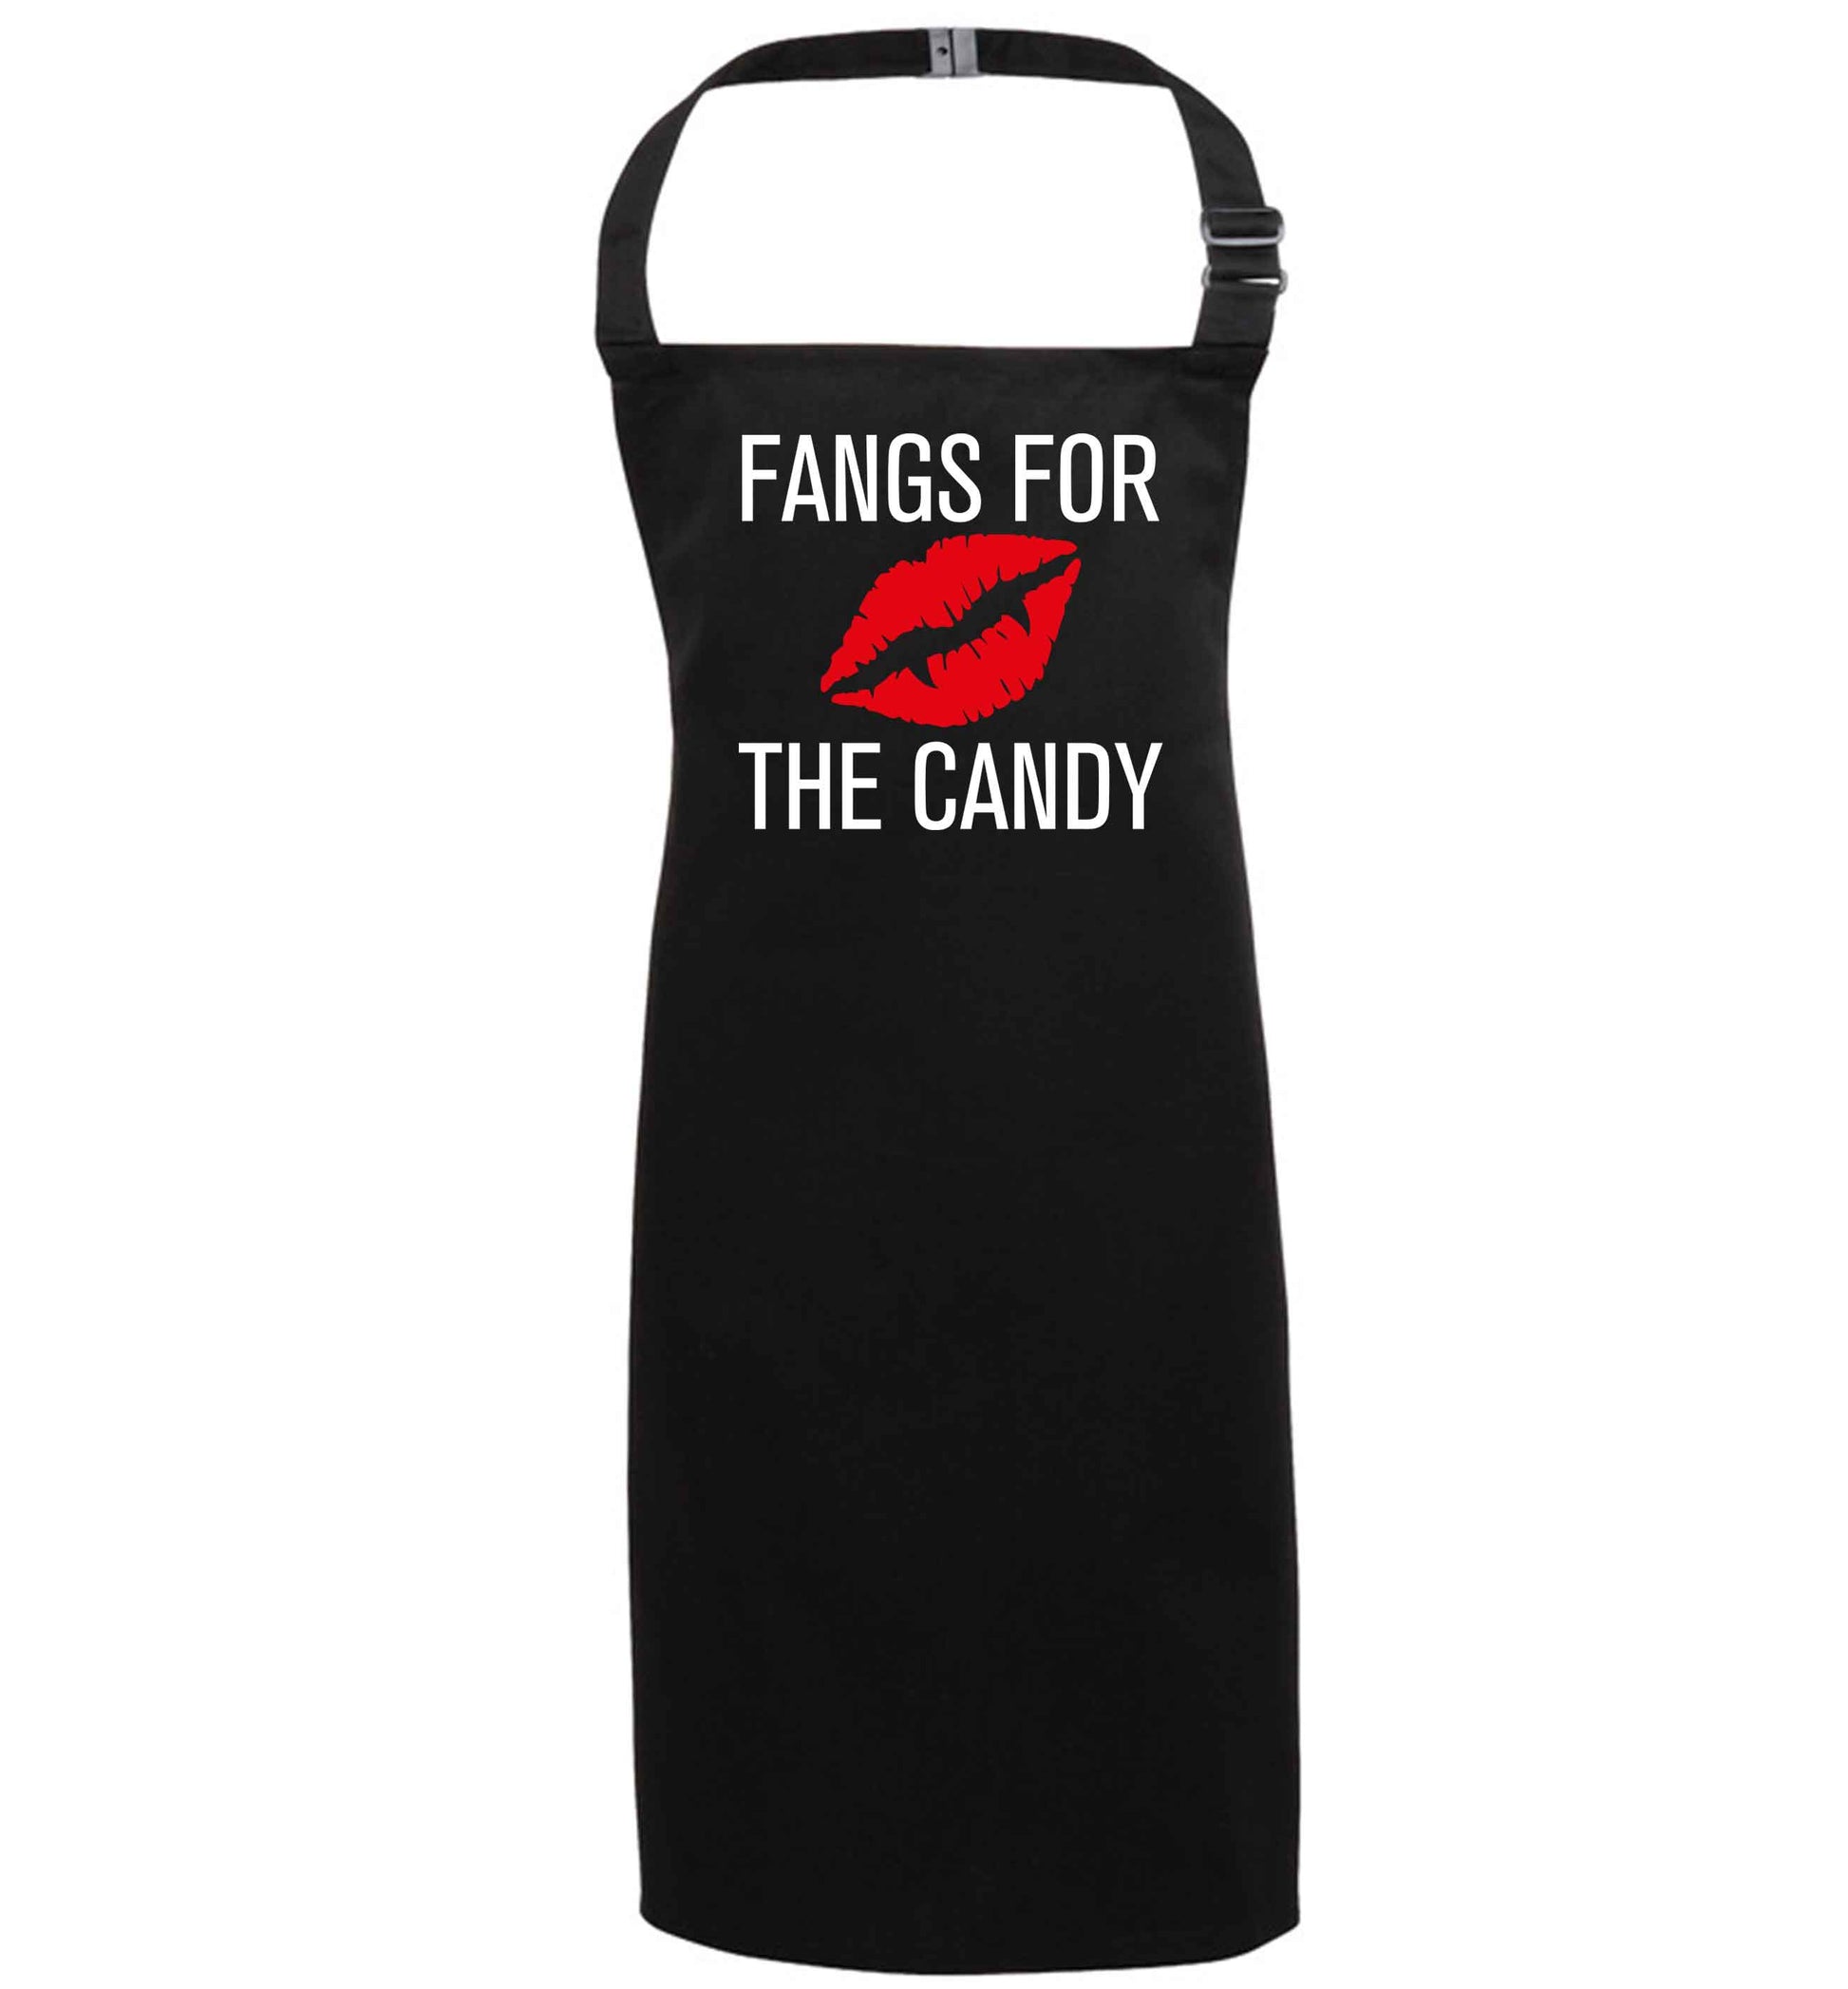 Fangs for the candy black apron 7-10 years